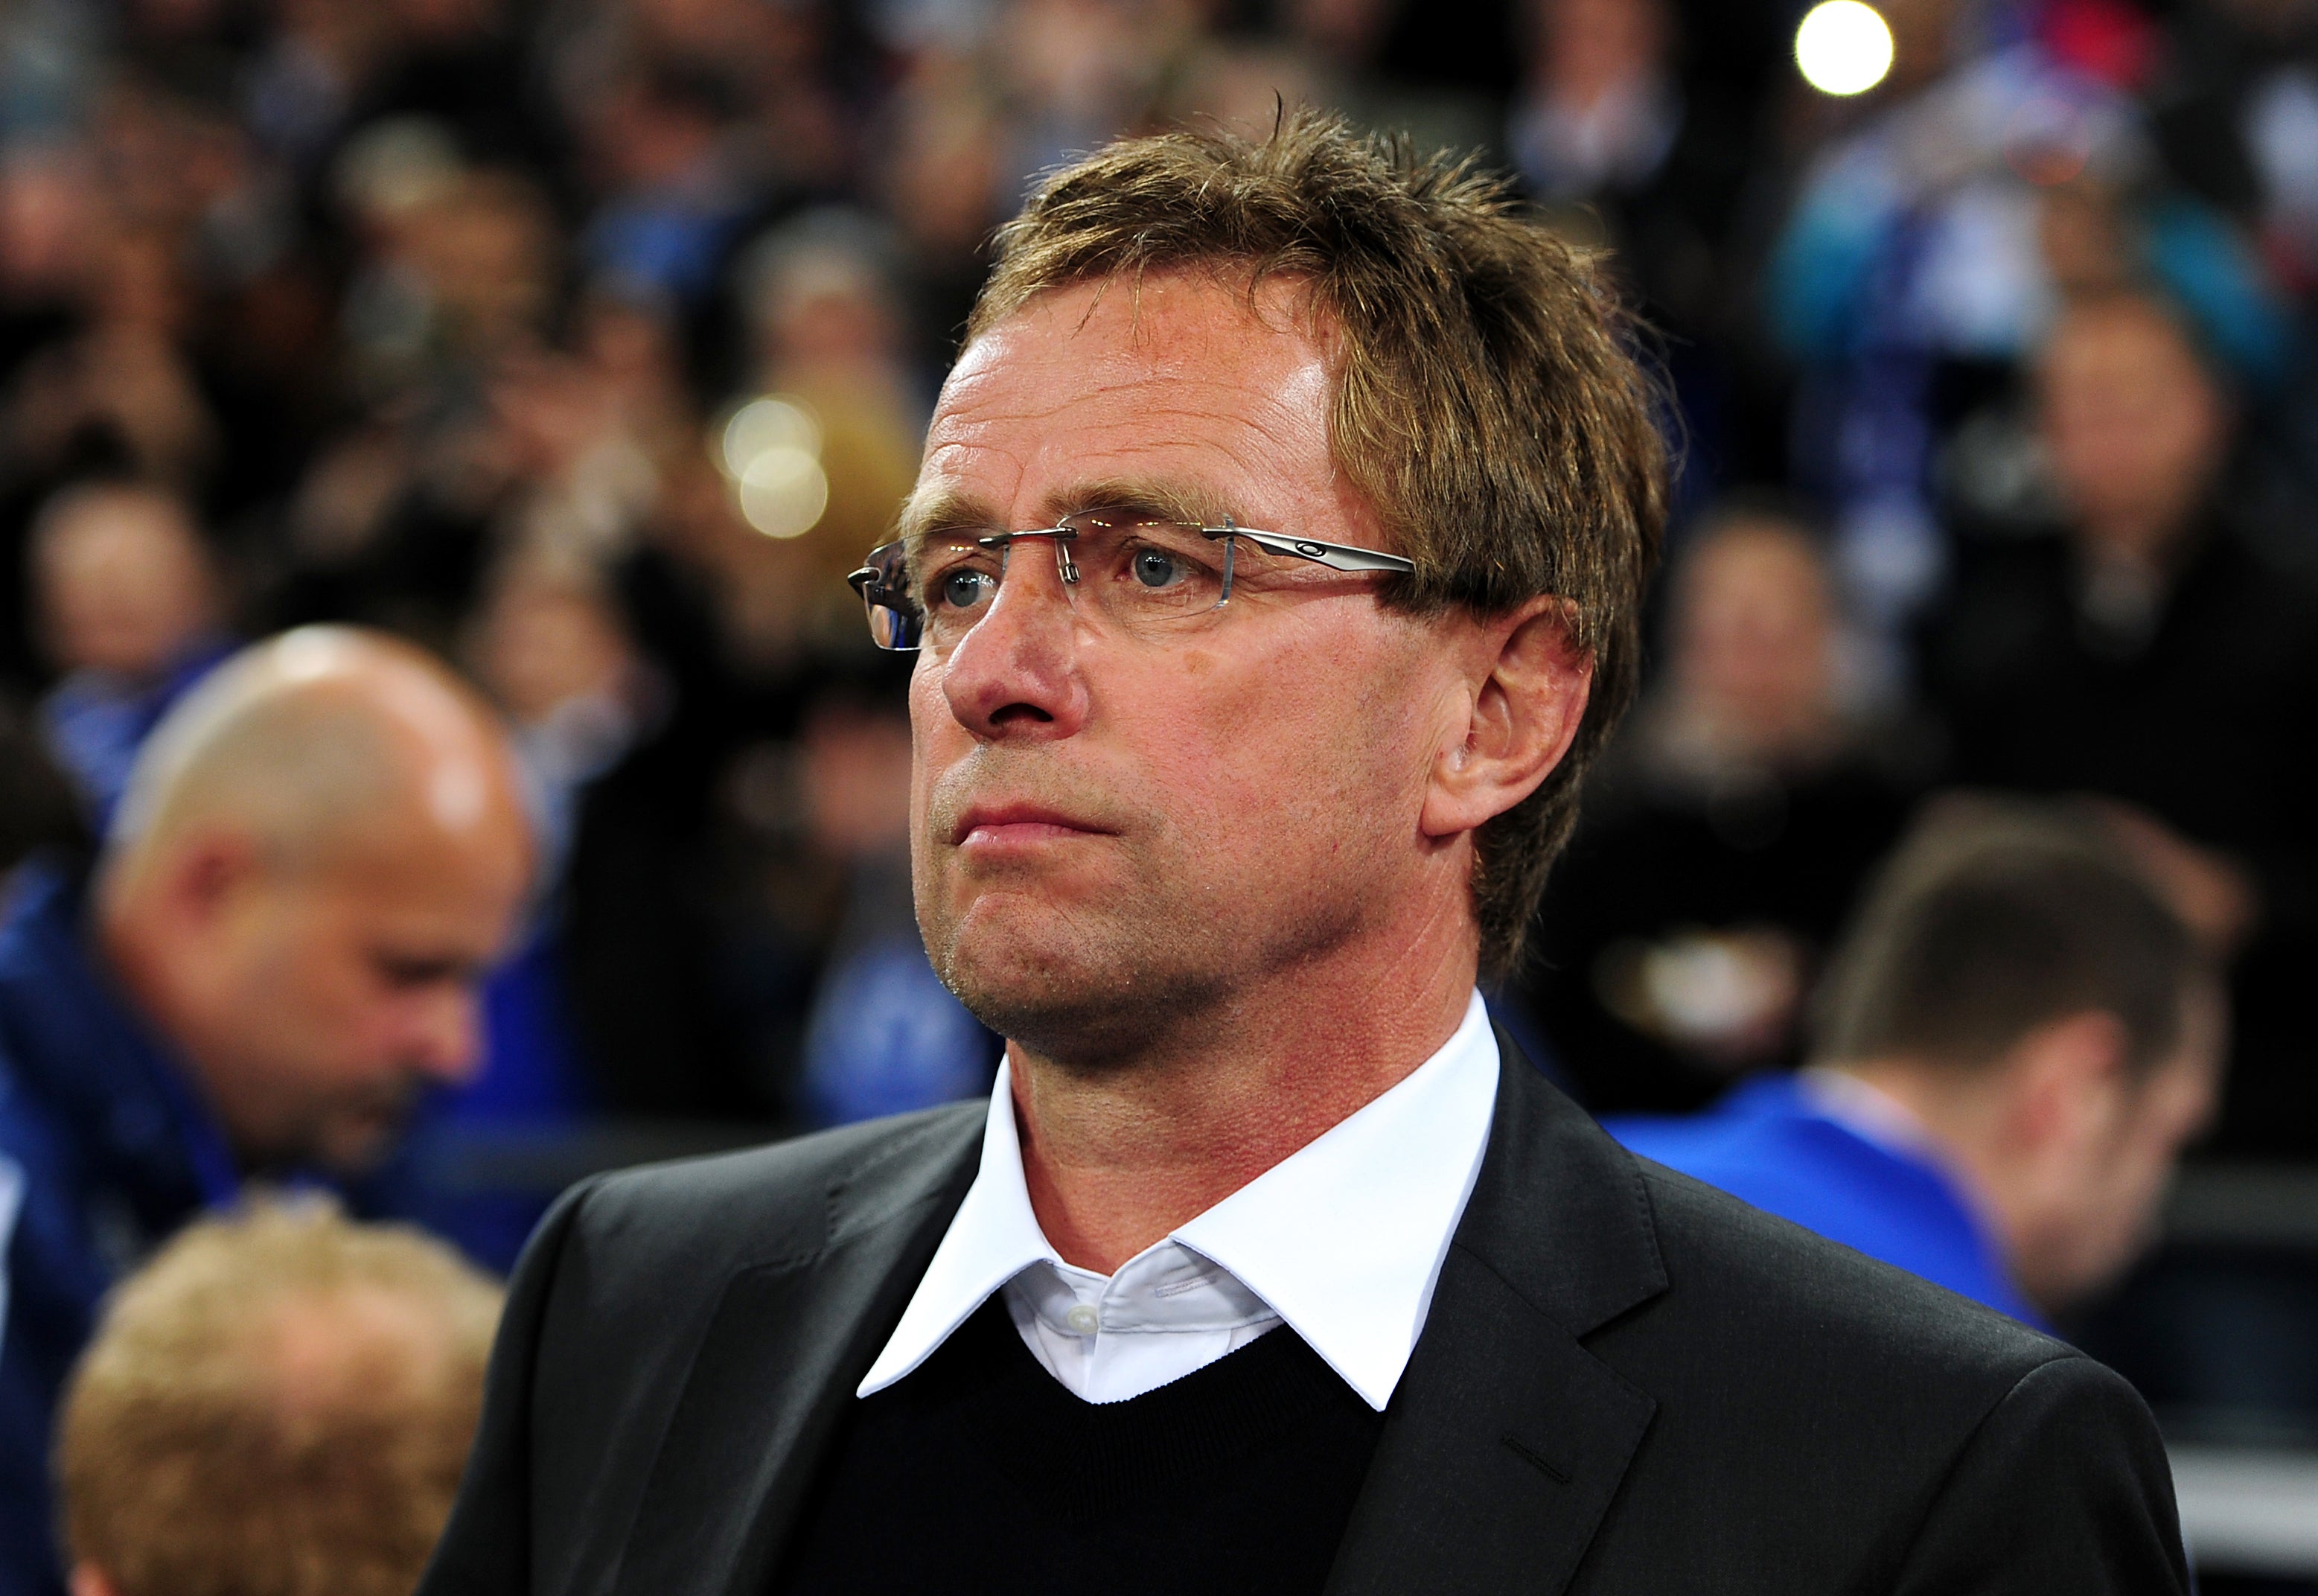 Rangnick has been hailed as one of the finest football minds of his generation